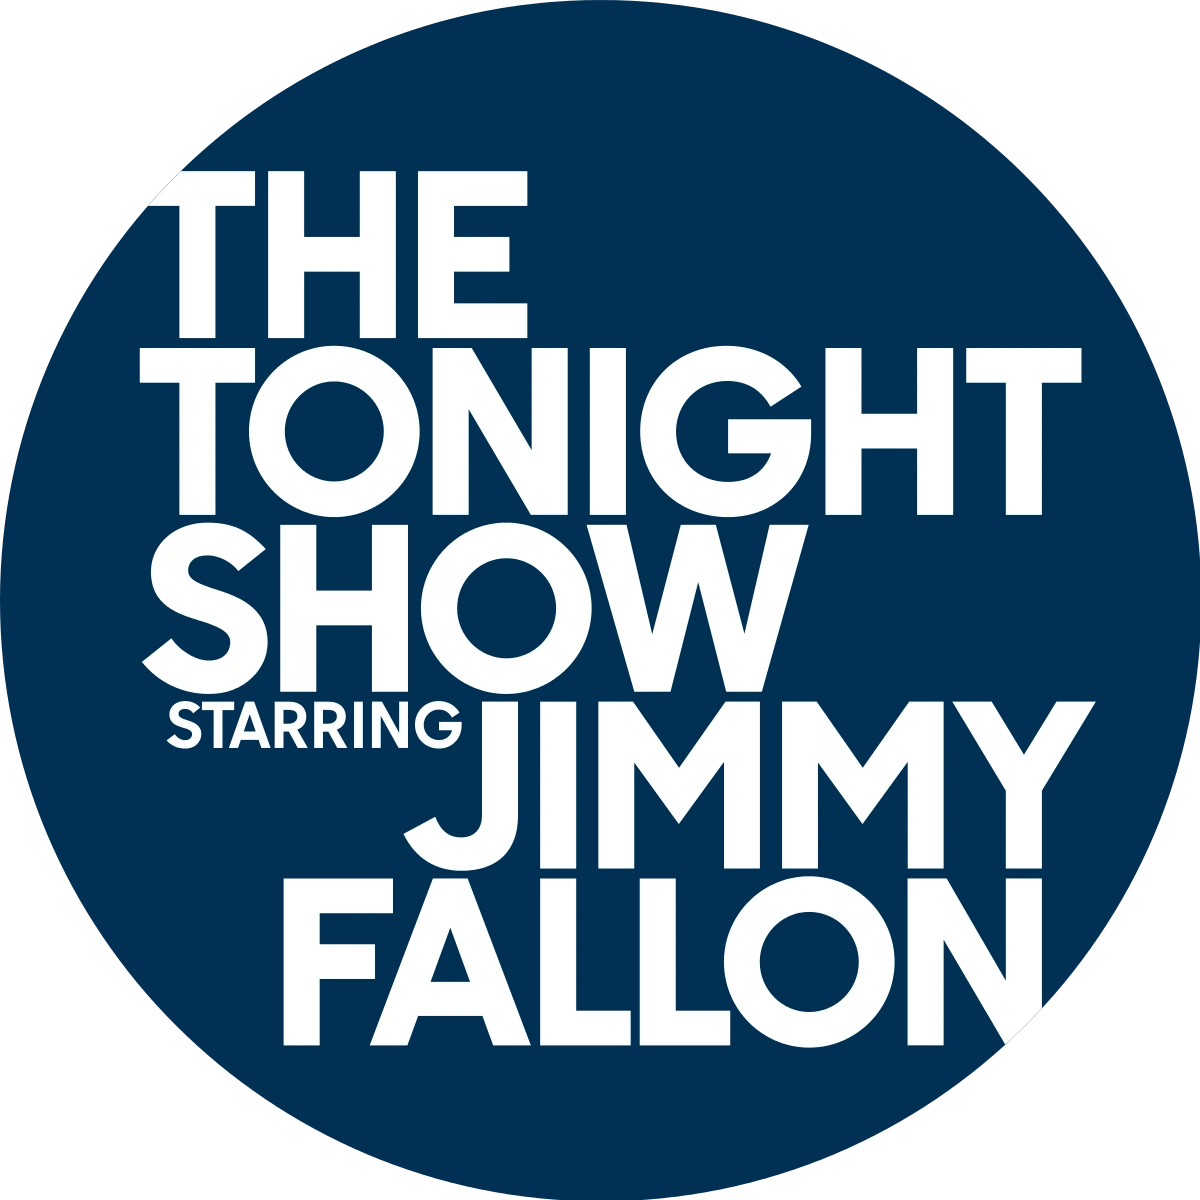 NBC Celebrates 10 Years of "The Tonight Show Starring Jimmy Fallon" with 2-Hour Primetime Special